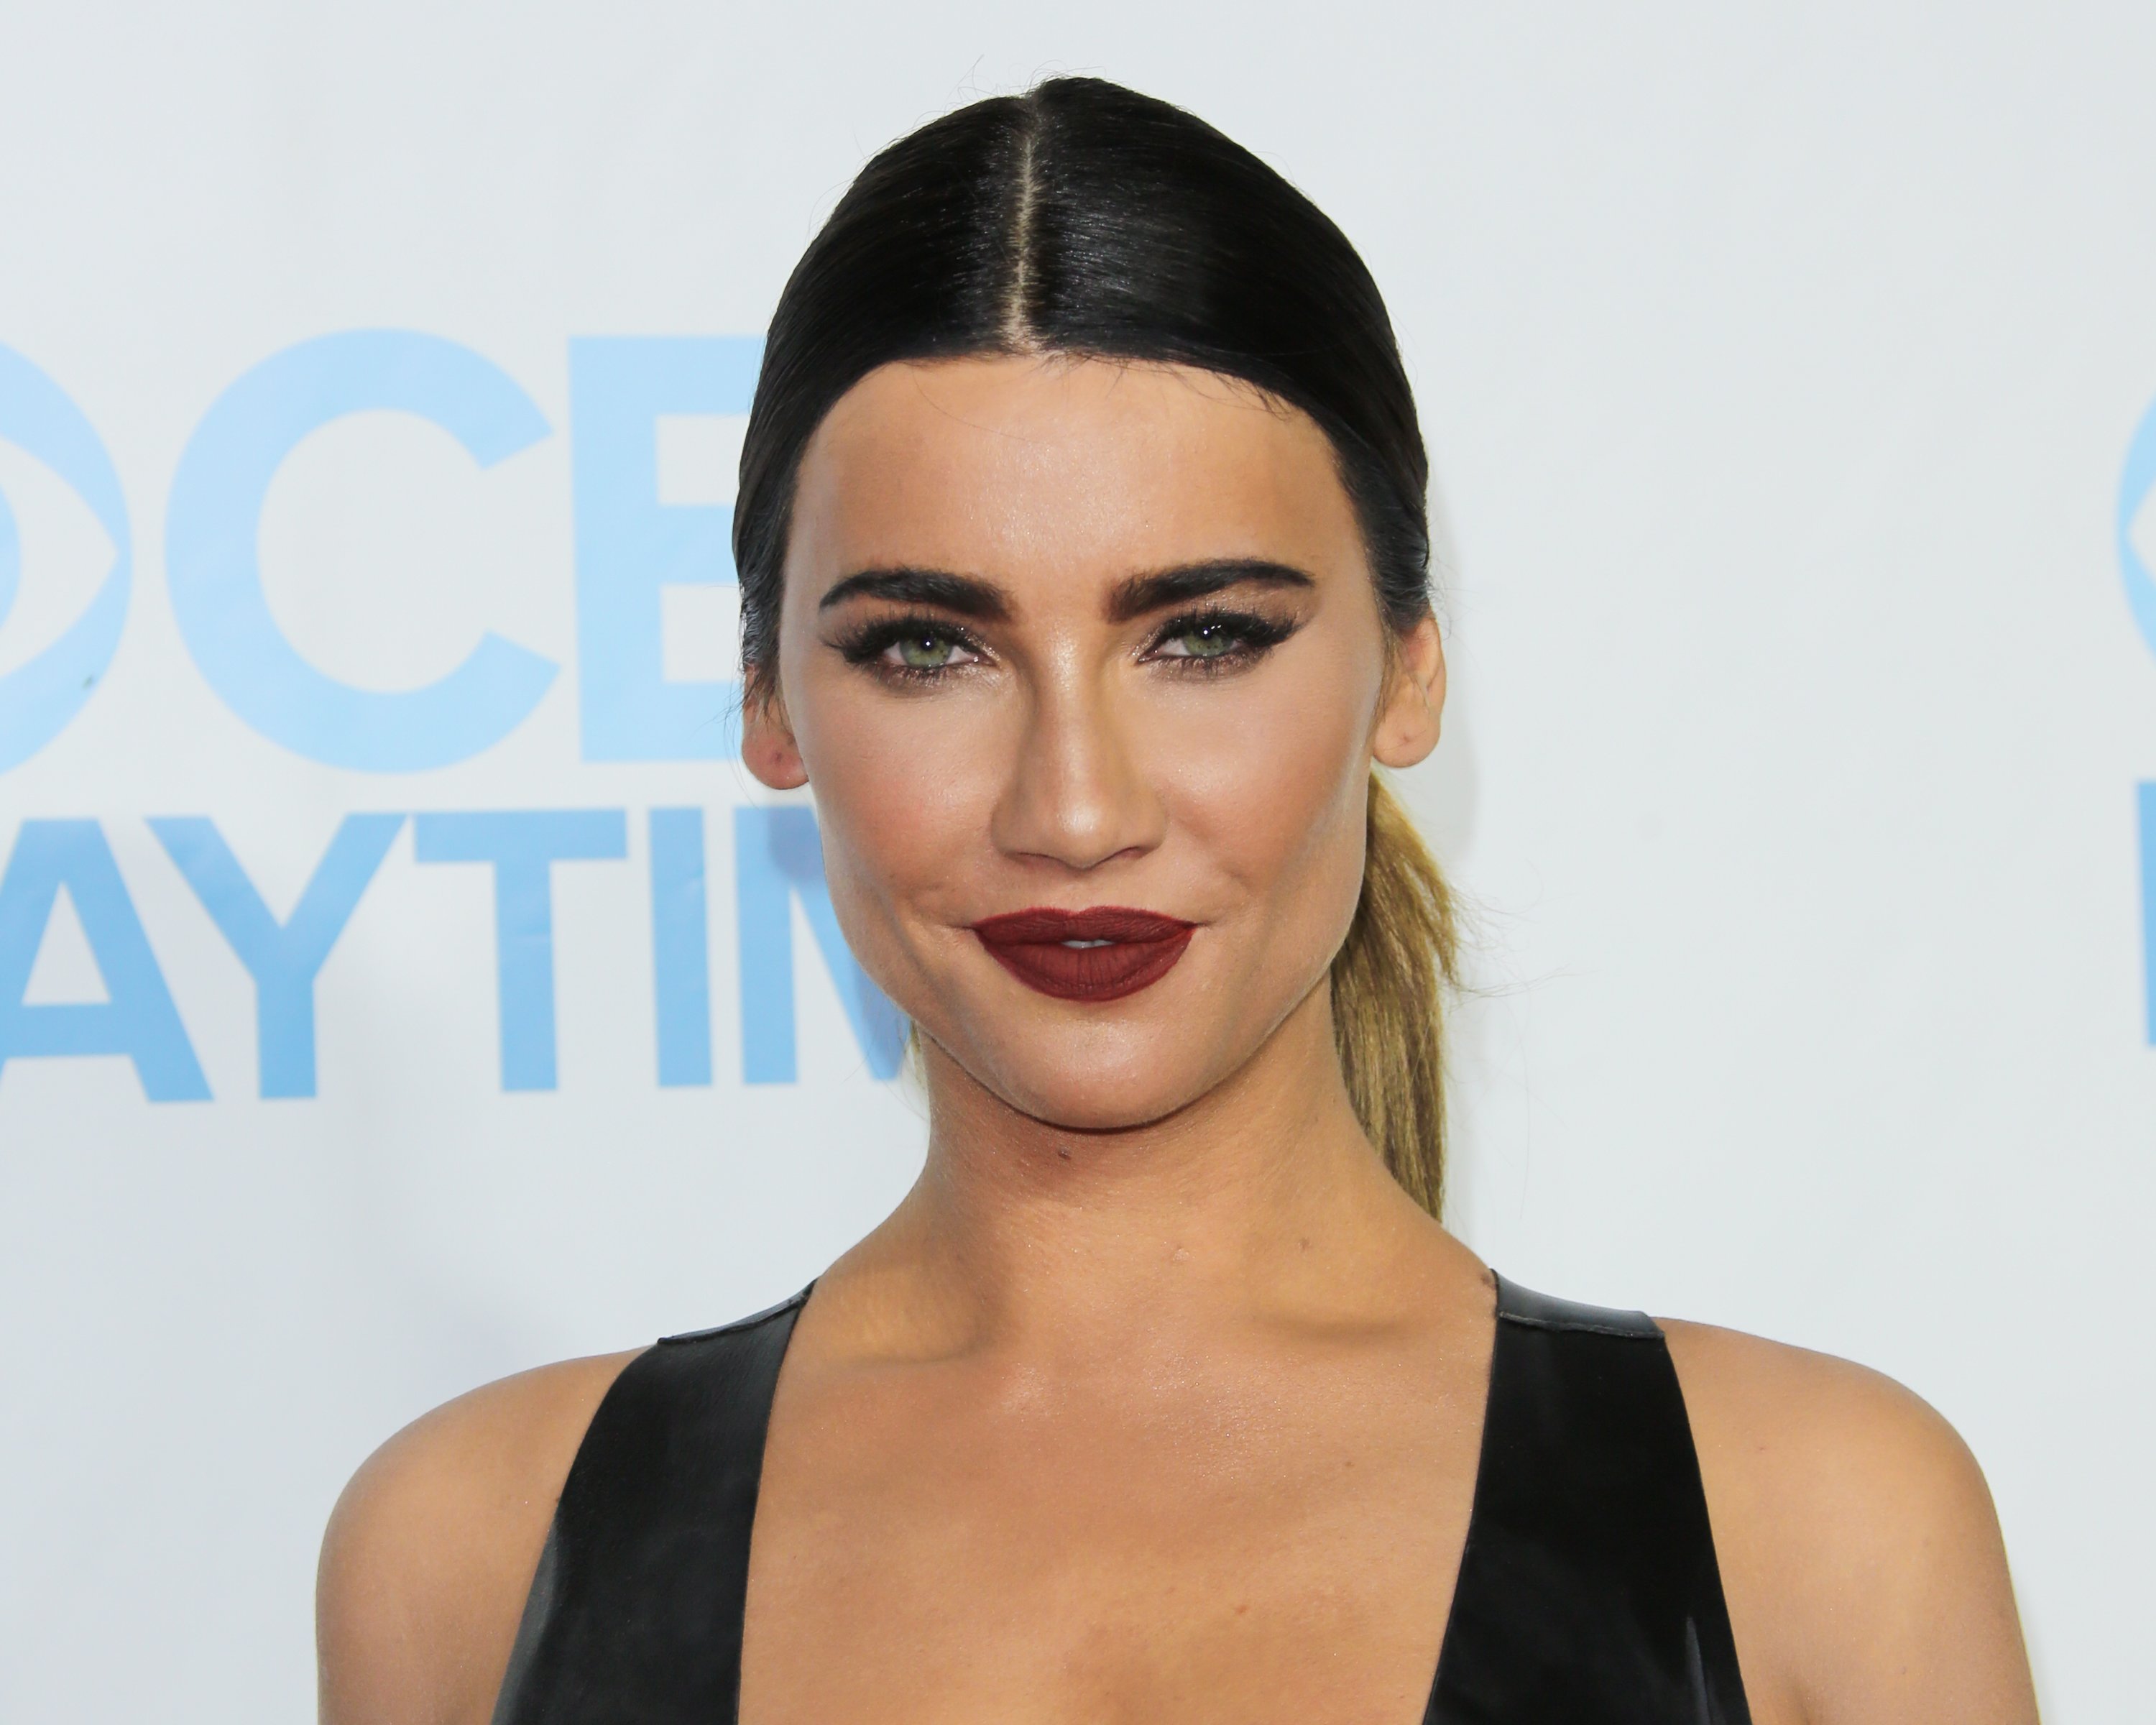 'The Bold and the Beautiful' actor Jacqueline MacInnes Wood in a black dress, dark lipstick, and a slick ponytail.